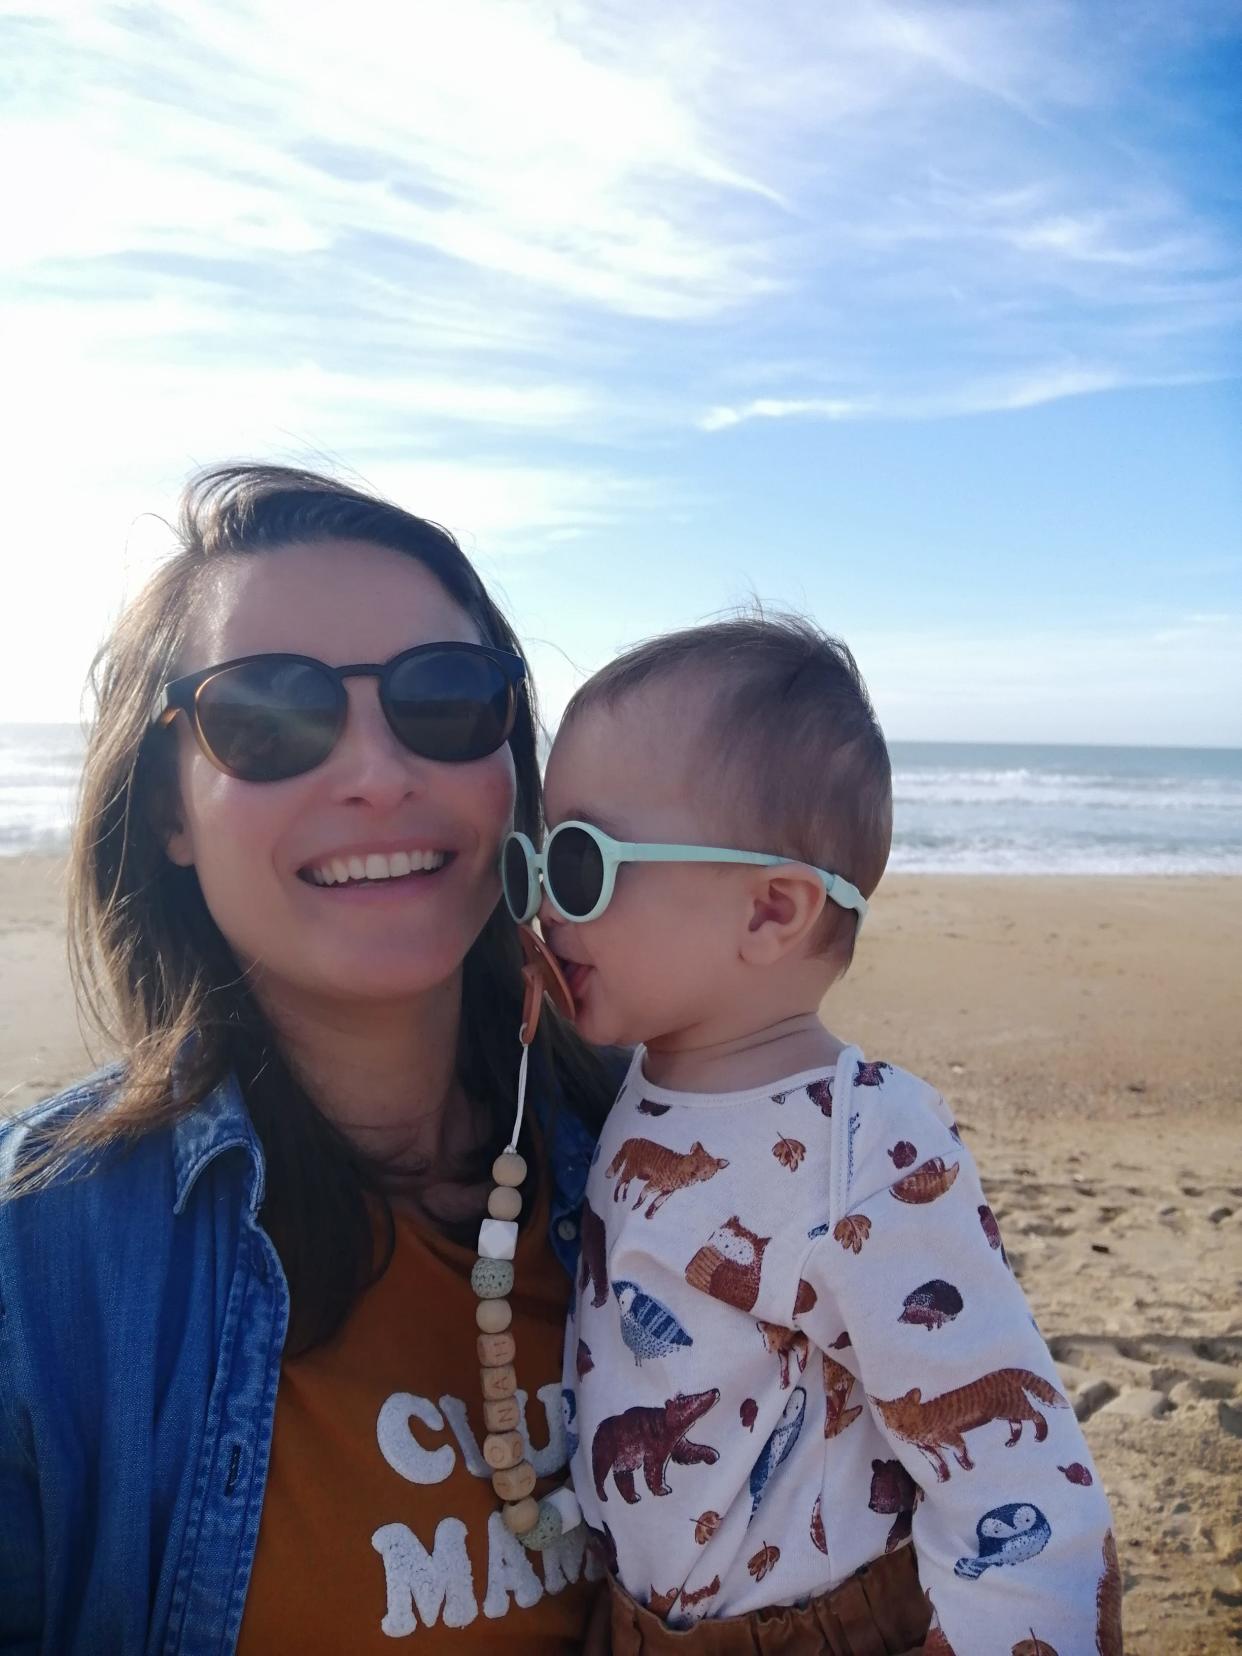 Anna's wife and their son, both wearing sunglasses on a beach